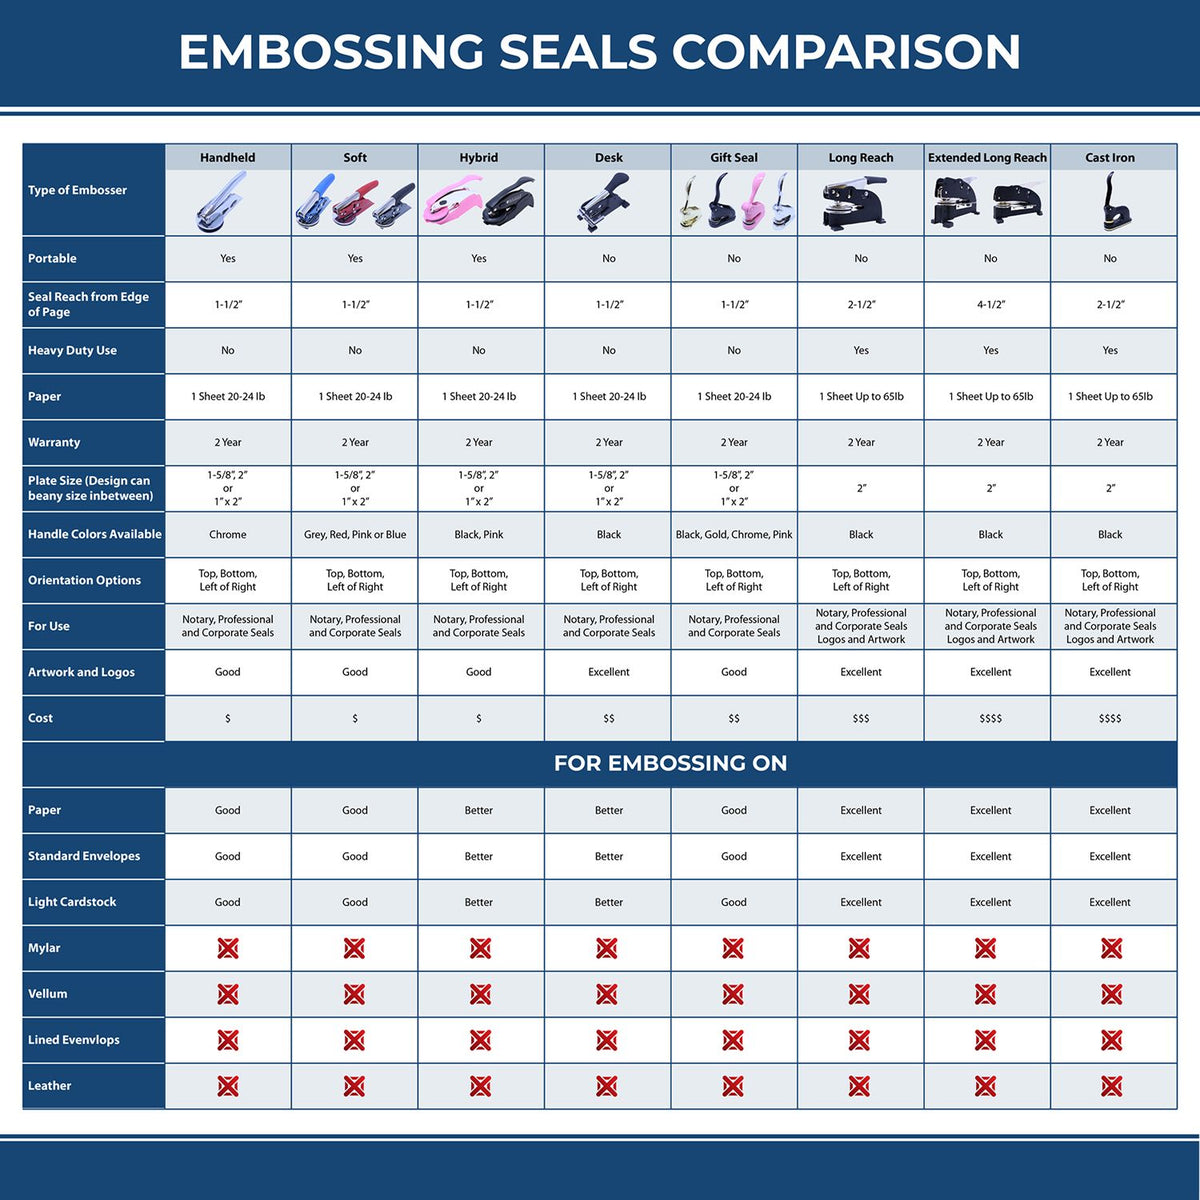 A comparison chart for the different types of mount models available for the Heavy Duty Cast Iron Alaska Engineer Seal Embosser.